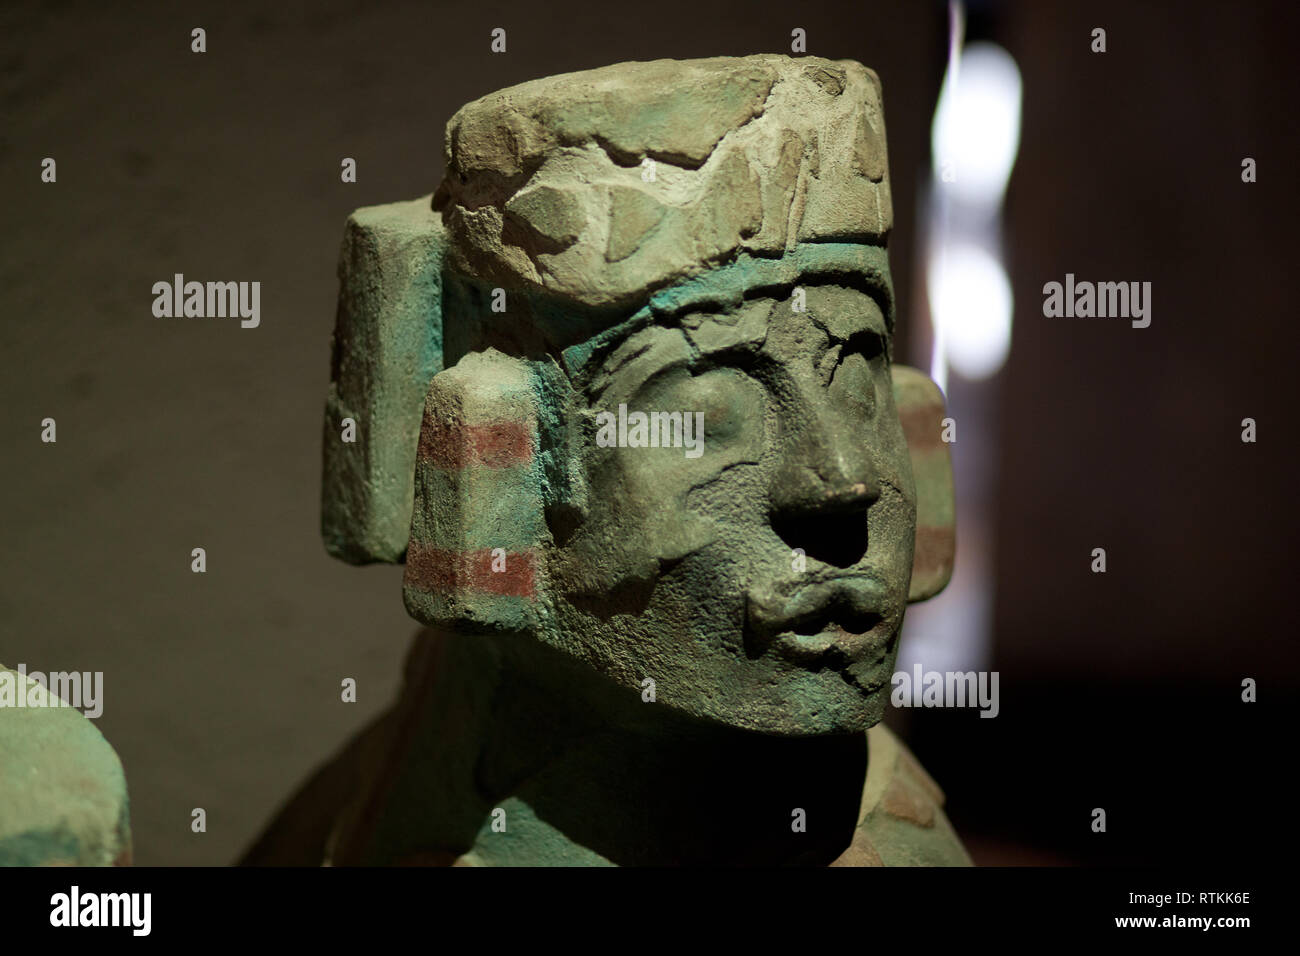 Stone sculpture of Aztec God Chac Mool from the city of Tenochtitlan. Mexico city, mexico Stock Photo